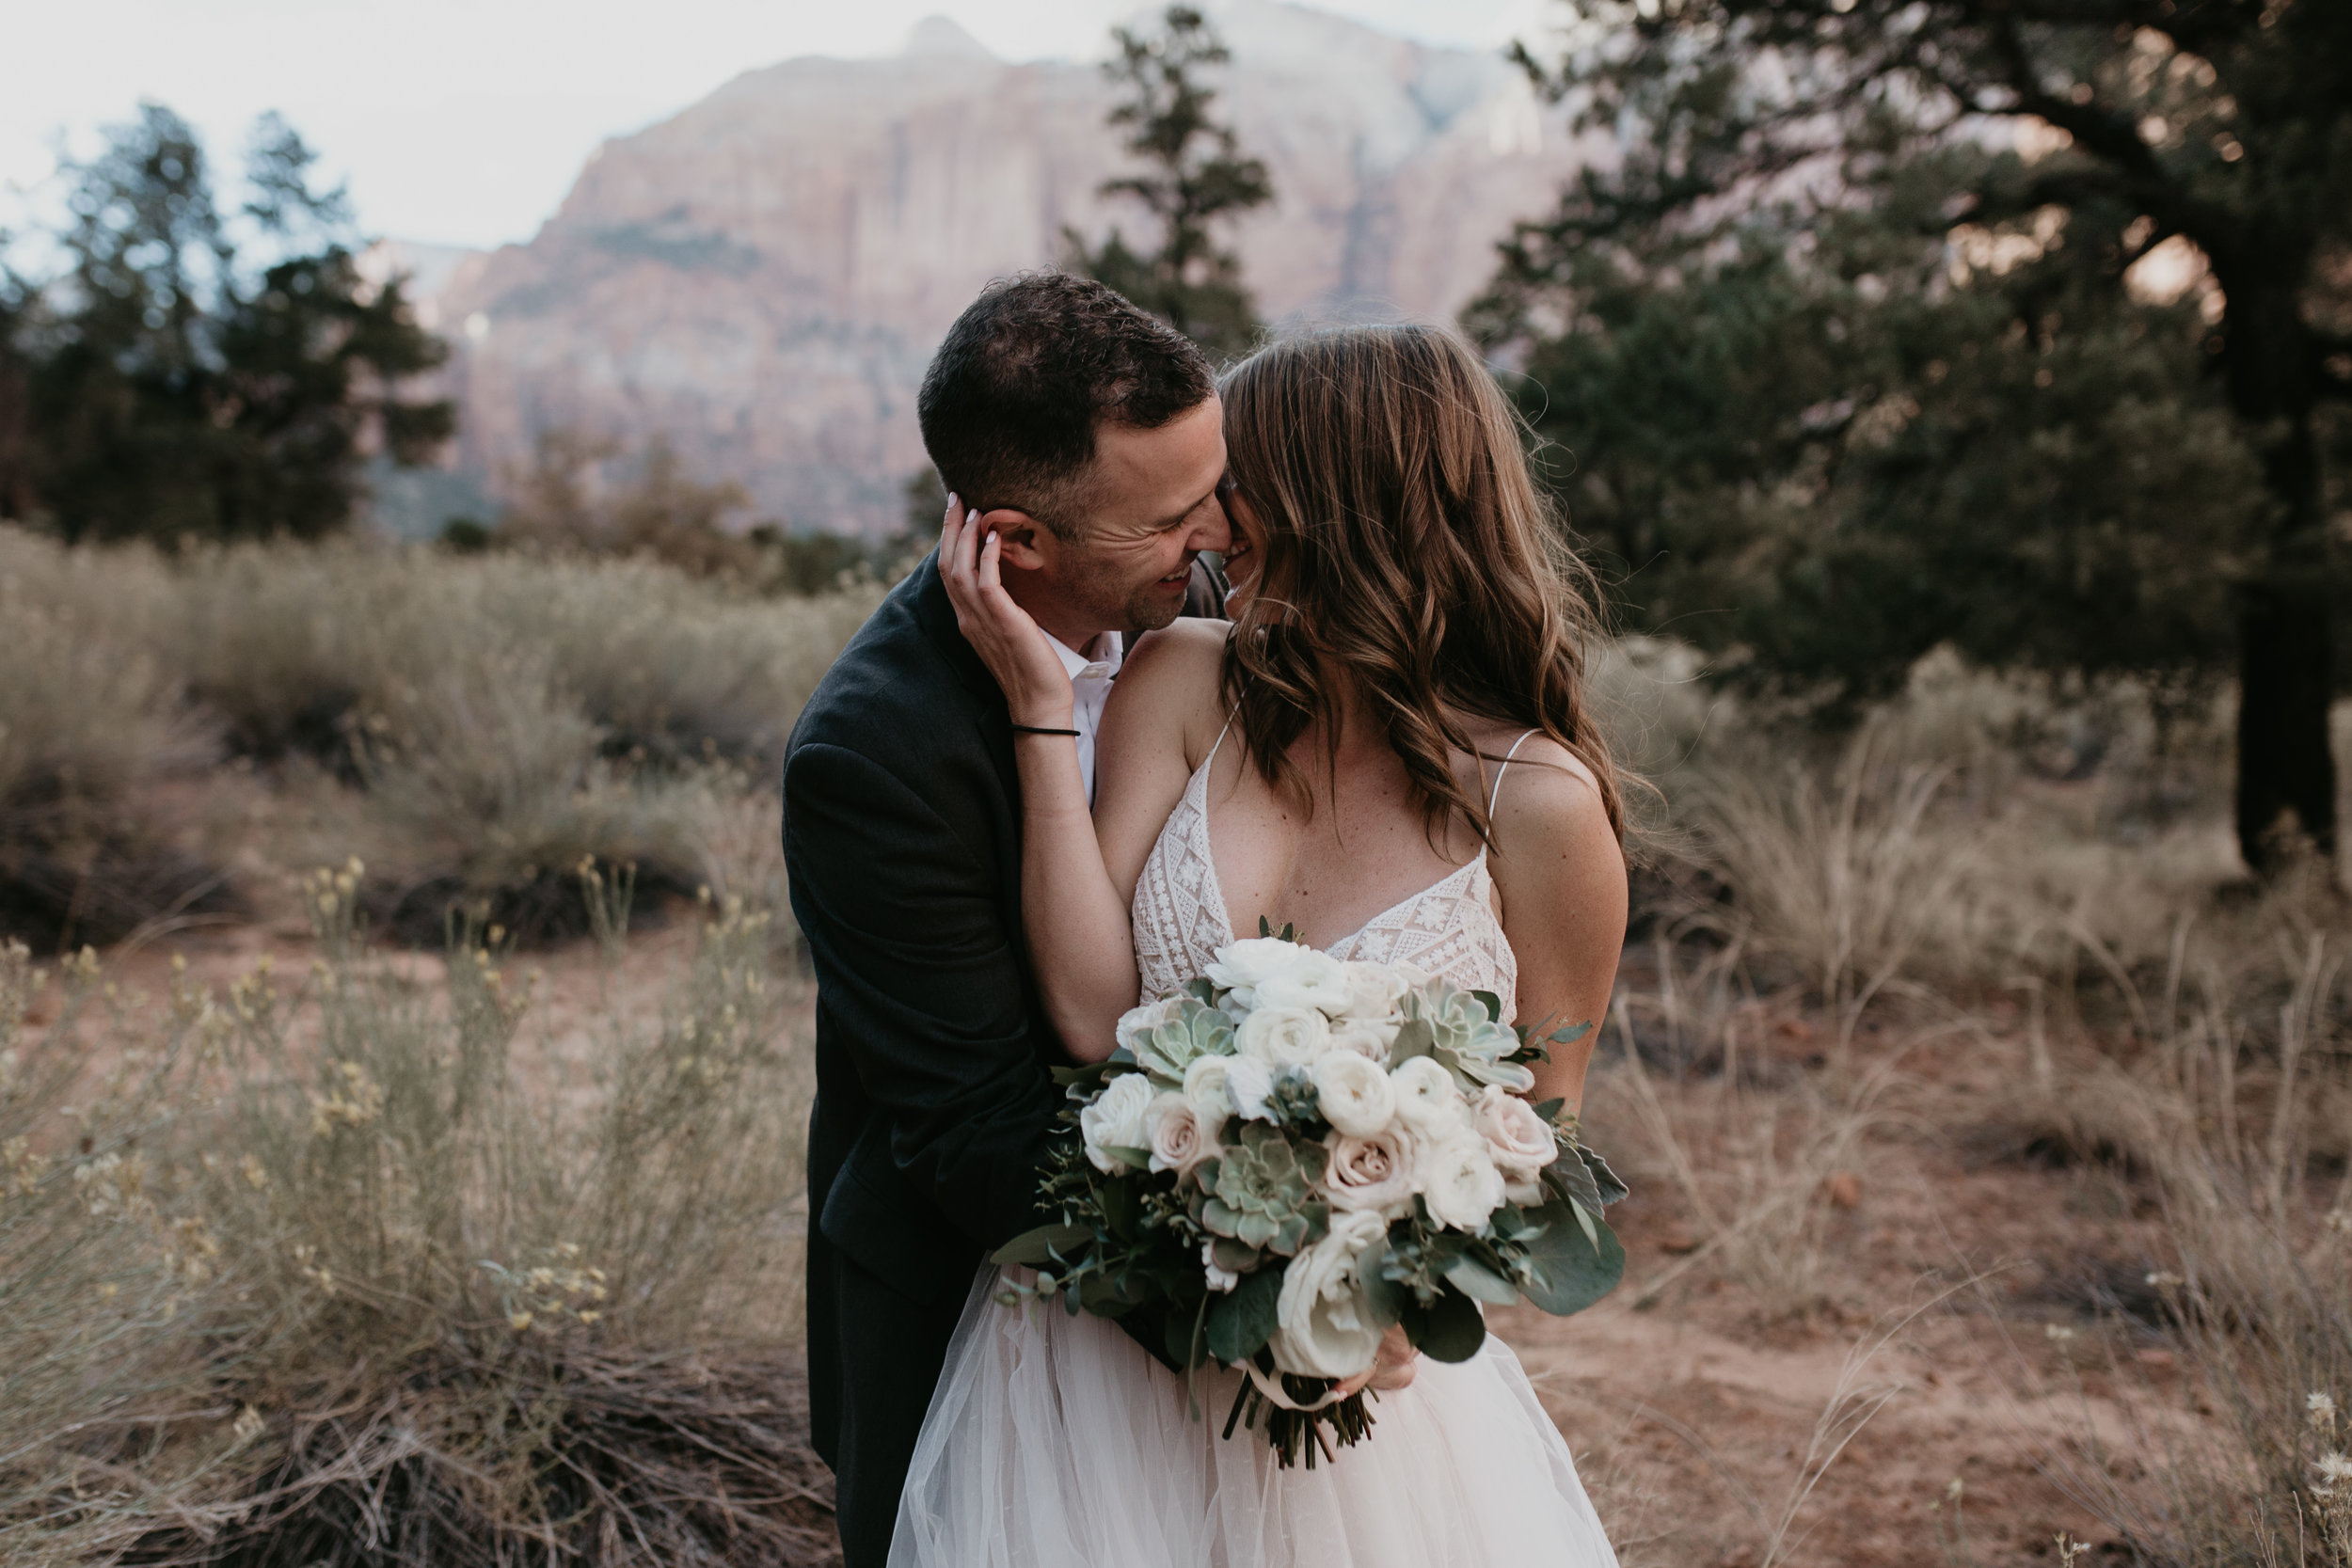 nicole-daacke-photography-zion-national-park-elopement-photographer-canyon-overlook-trail-elope-hiking-adventure-wedding-photos-fall-utah-red-rock-canyon-stgeorge-eloping-photographer-22.jpg